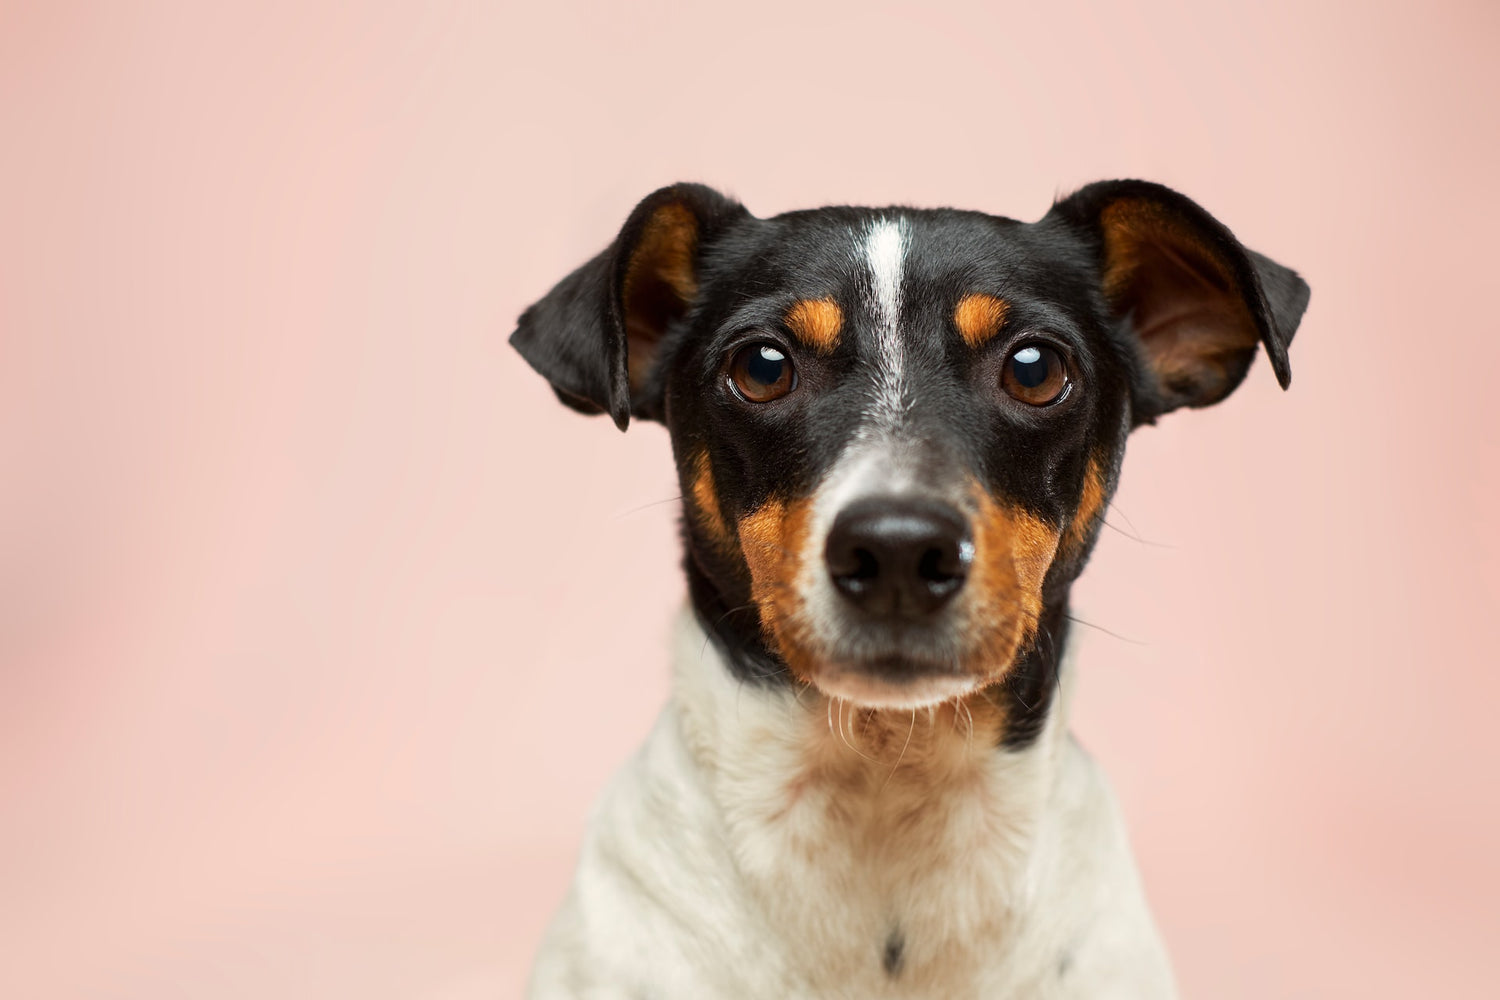 Portrait shot of a Jack Russell Terrier.